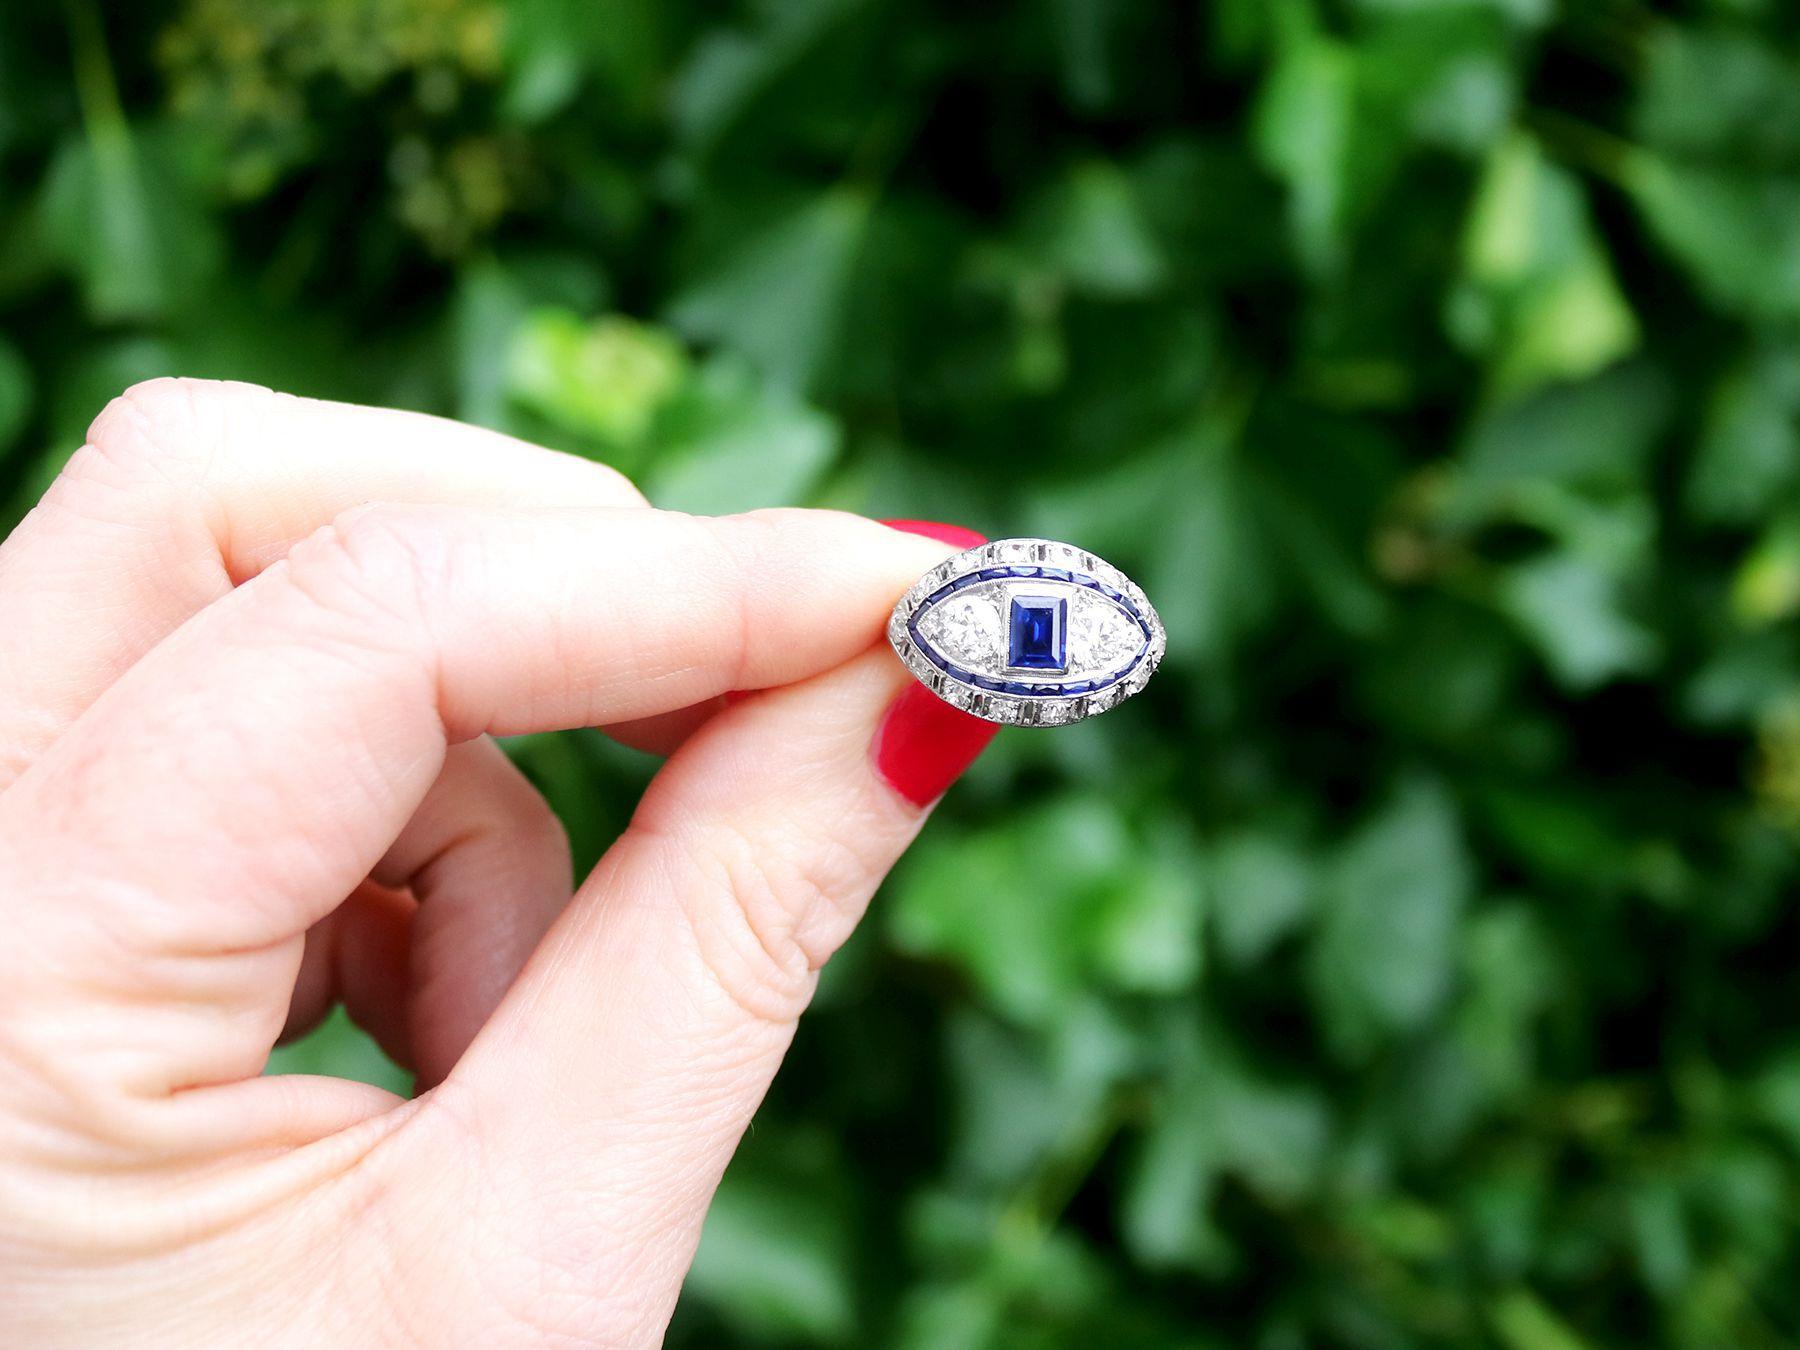 A stunning, fine and impressive antique French 1.10 carat Basaltic sapphire and 2.45 carat diamond, platinum Art Deco cocktail ring; part of our diverse collection of antique rings.

This stunning, fine and impressive antique sapphire and diamond